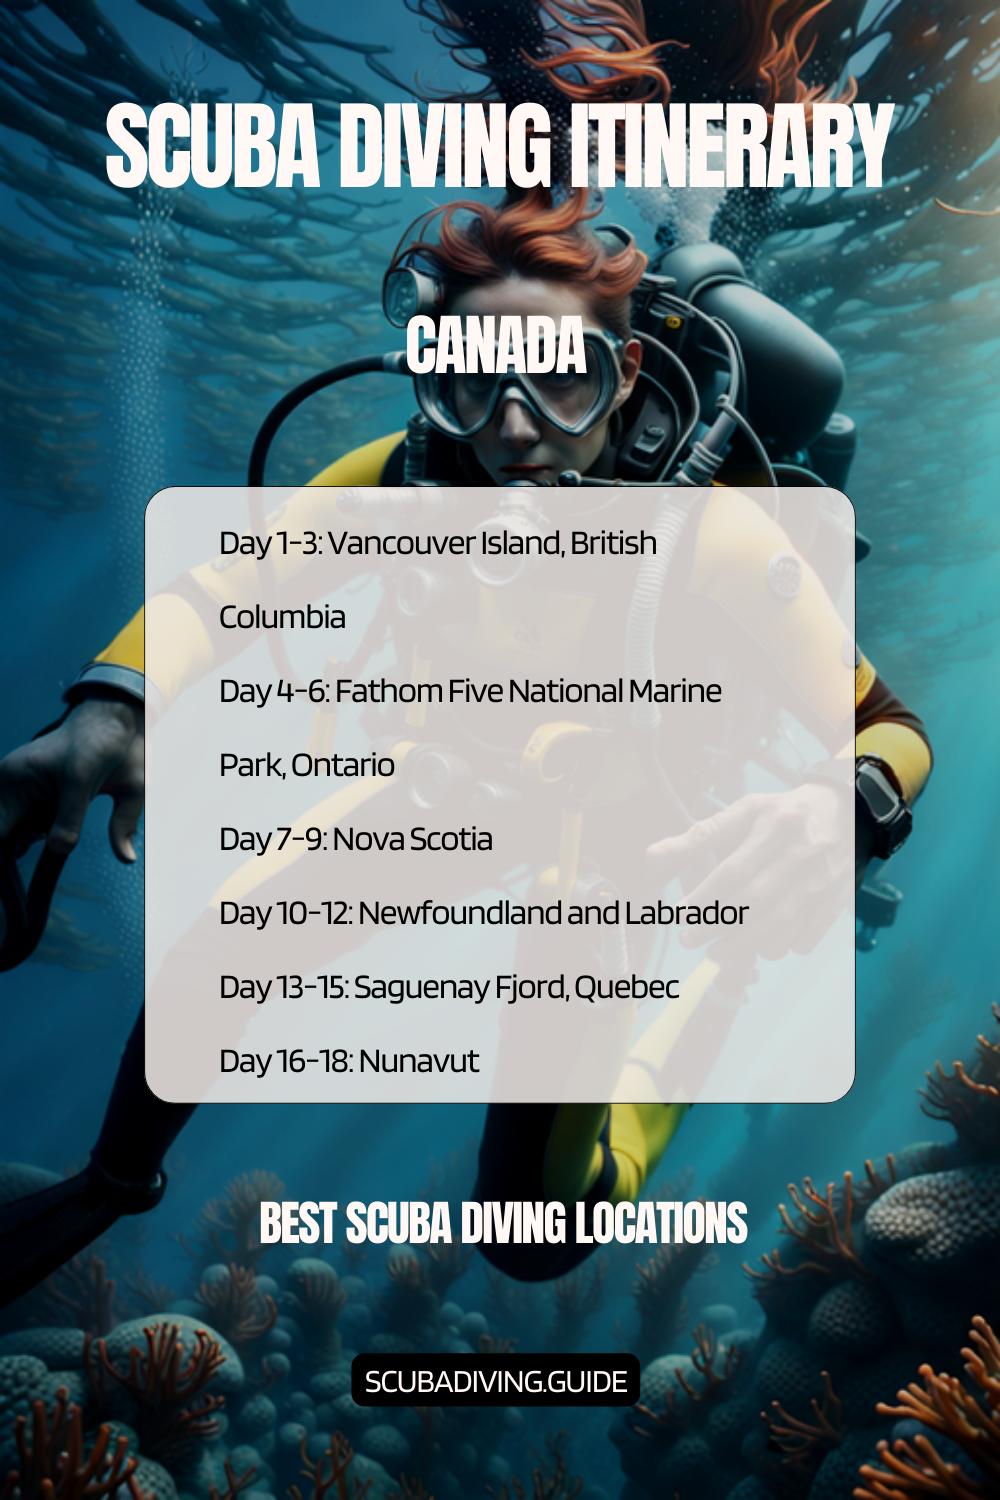 Canada Recommended Scuba Diving Itinerary